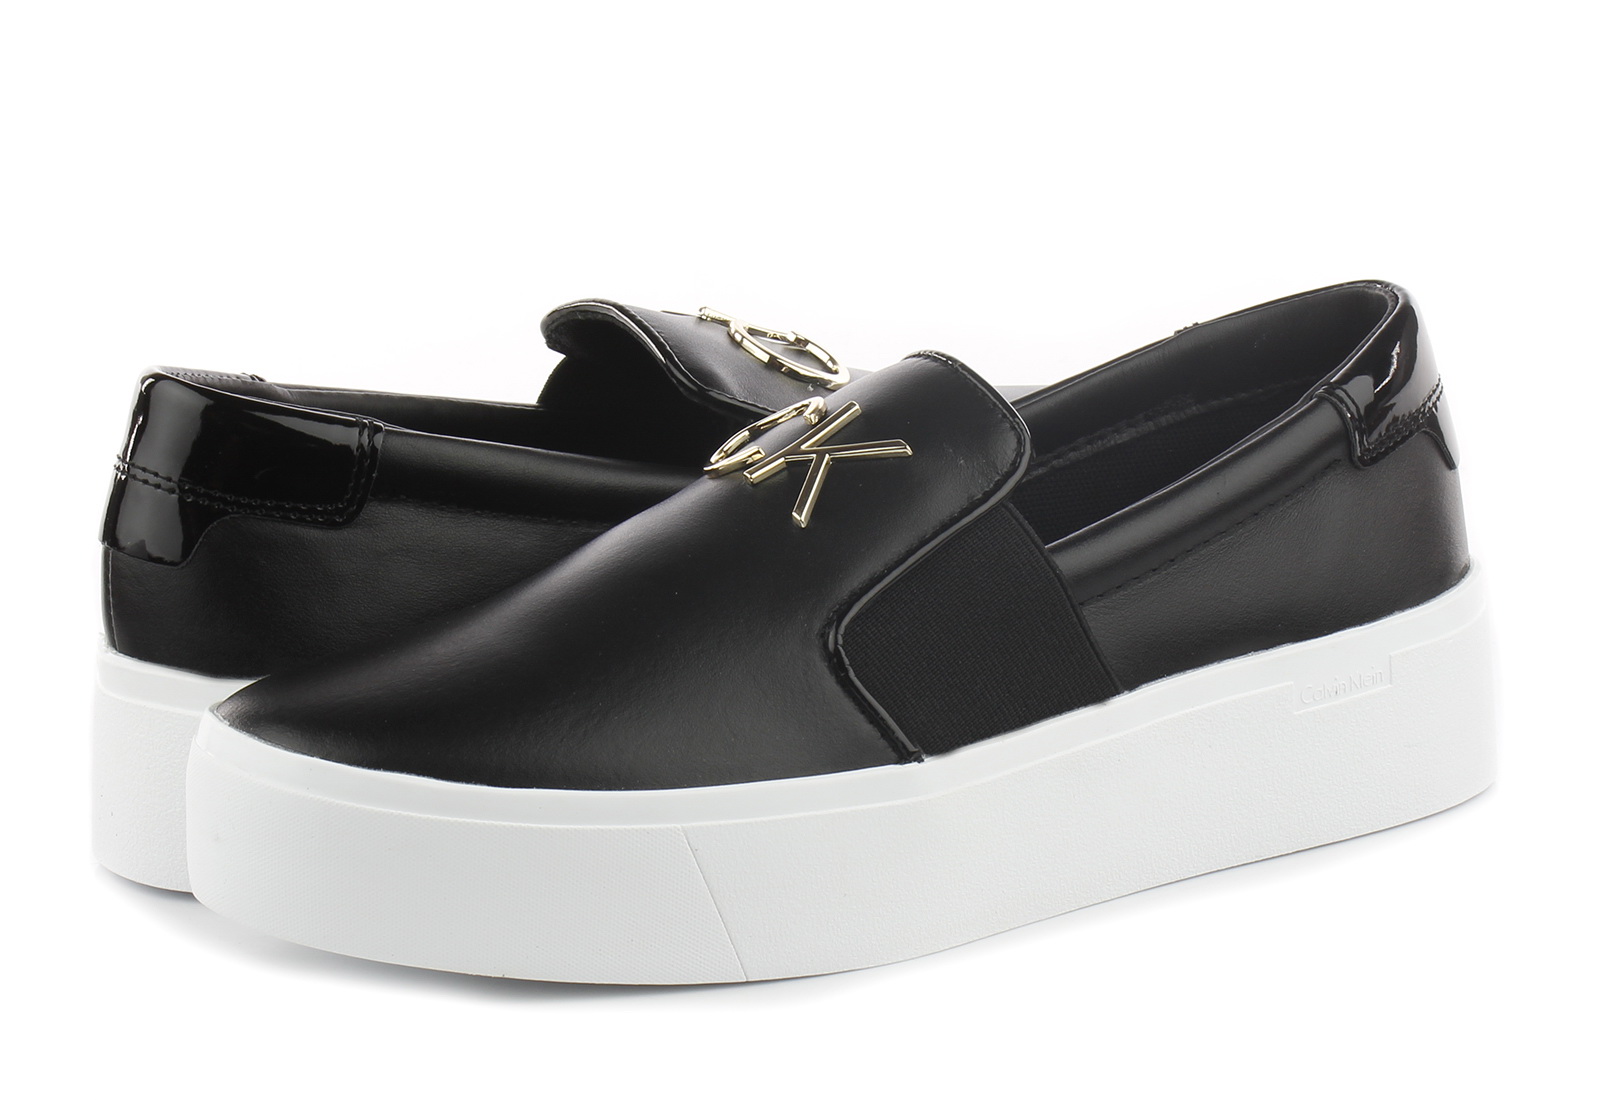 Calvin Klein Slip-ons - Cori 4a - HW00652-BAX - Online shop for sneakers,  shoes and boots